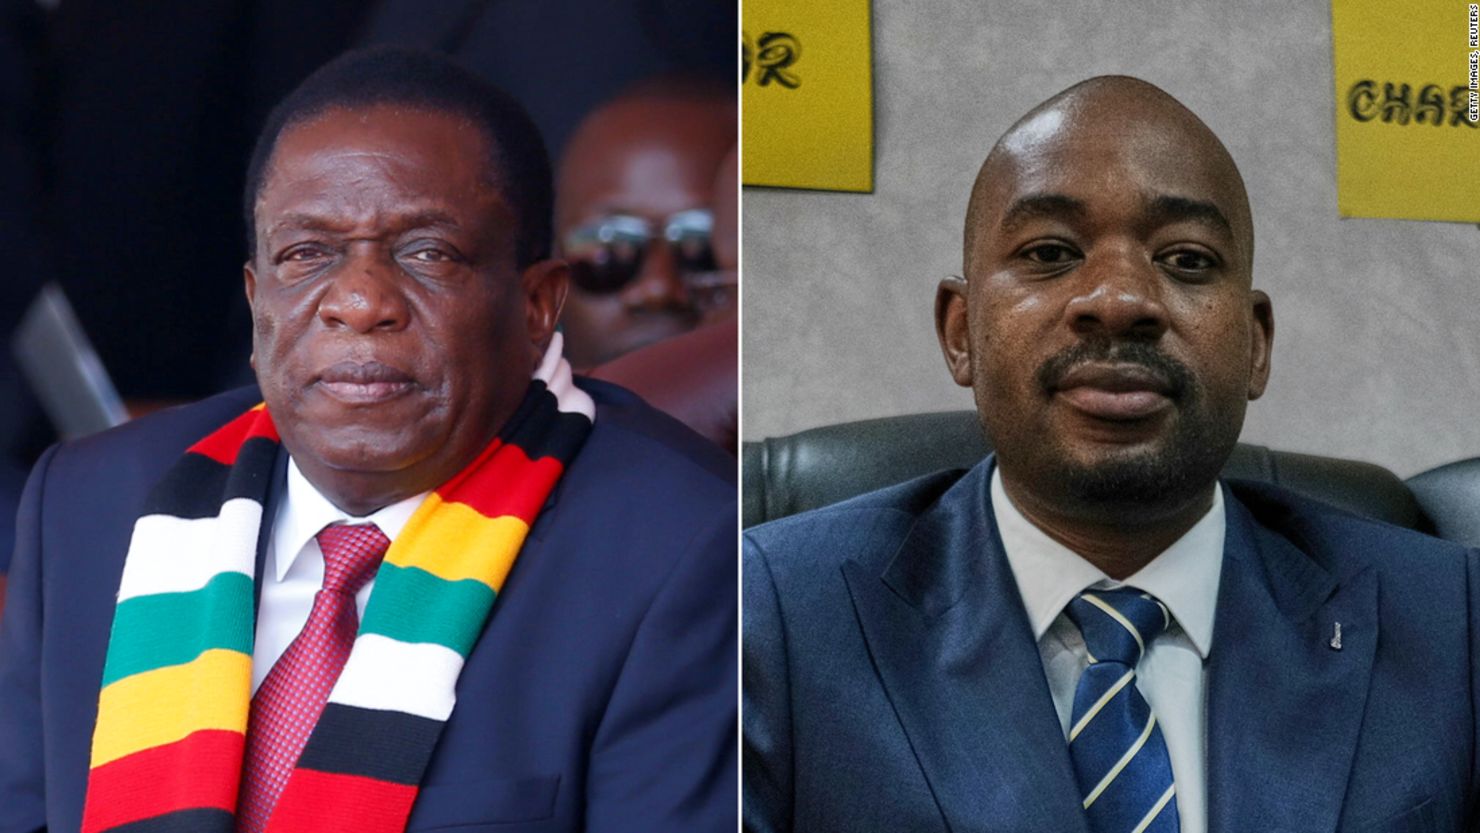 The contest is widely seen as a two-horse race between President Emmerson Mnangagwa (left) of the ruling Zanu-PF party and Nelson Chamisa (right) of the opposition Citizens' Coalition for Change.